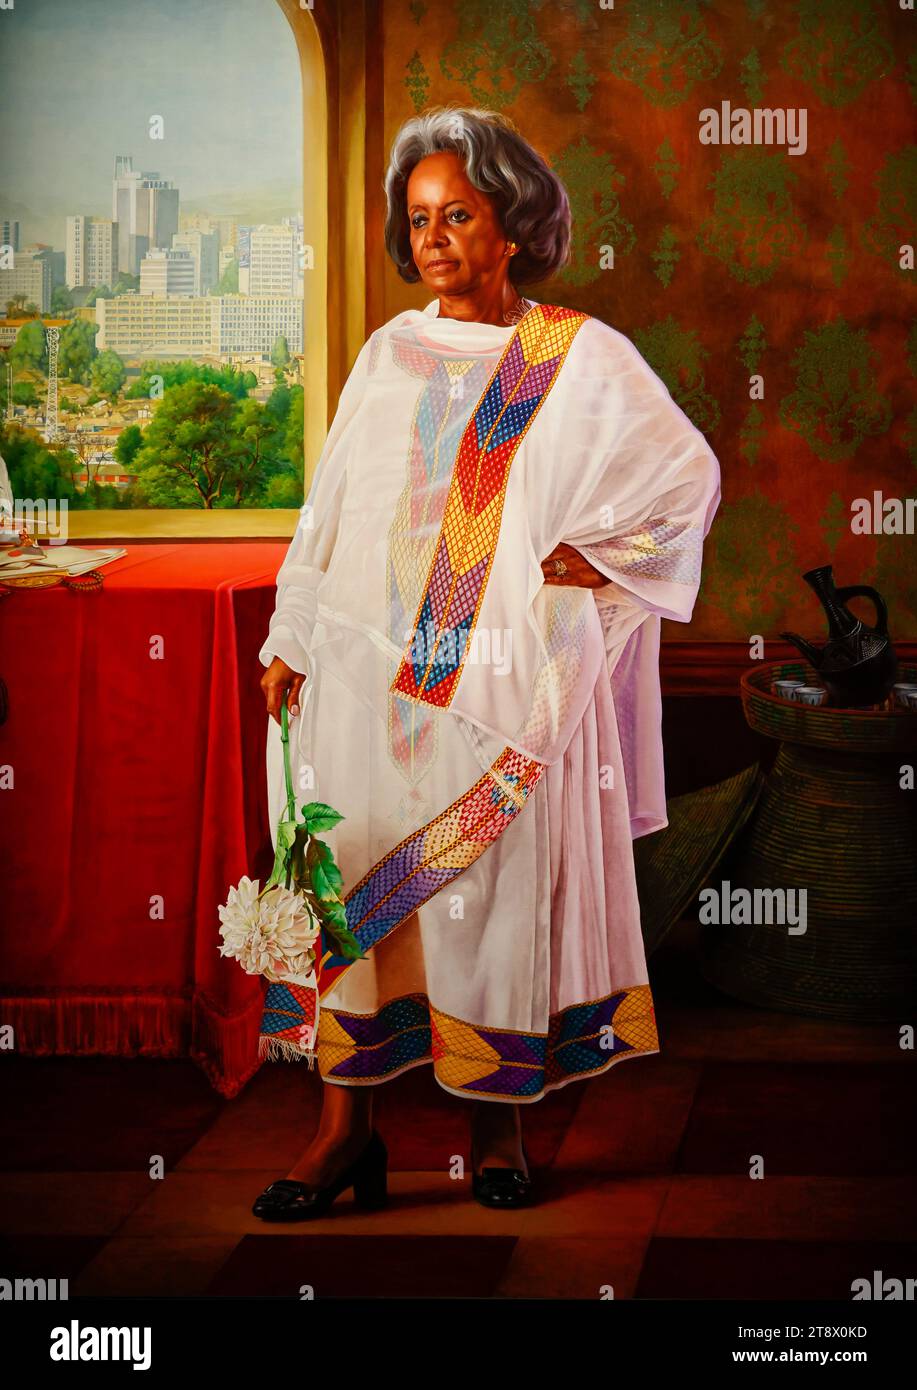 KEHINDE WILEY EXHIBITION AT THE MUSEE DU QUAI BRANLY: A PICTORIAL JOURNEY THROUGH AFRICAN POWER Stock Photo